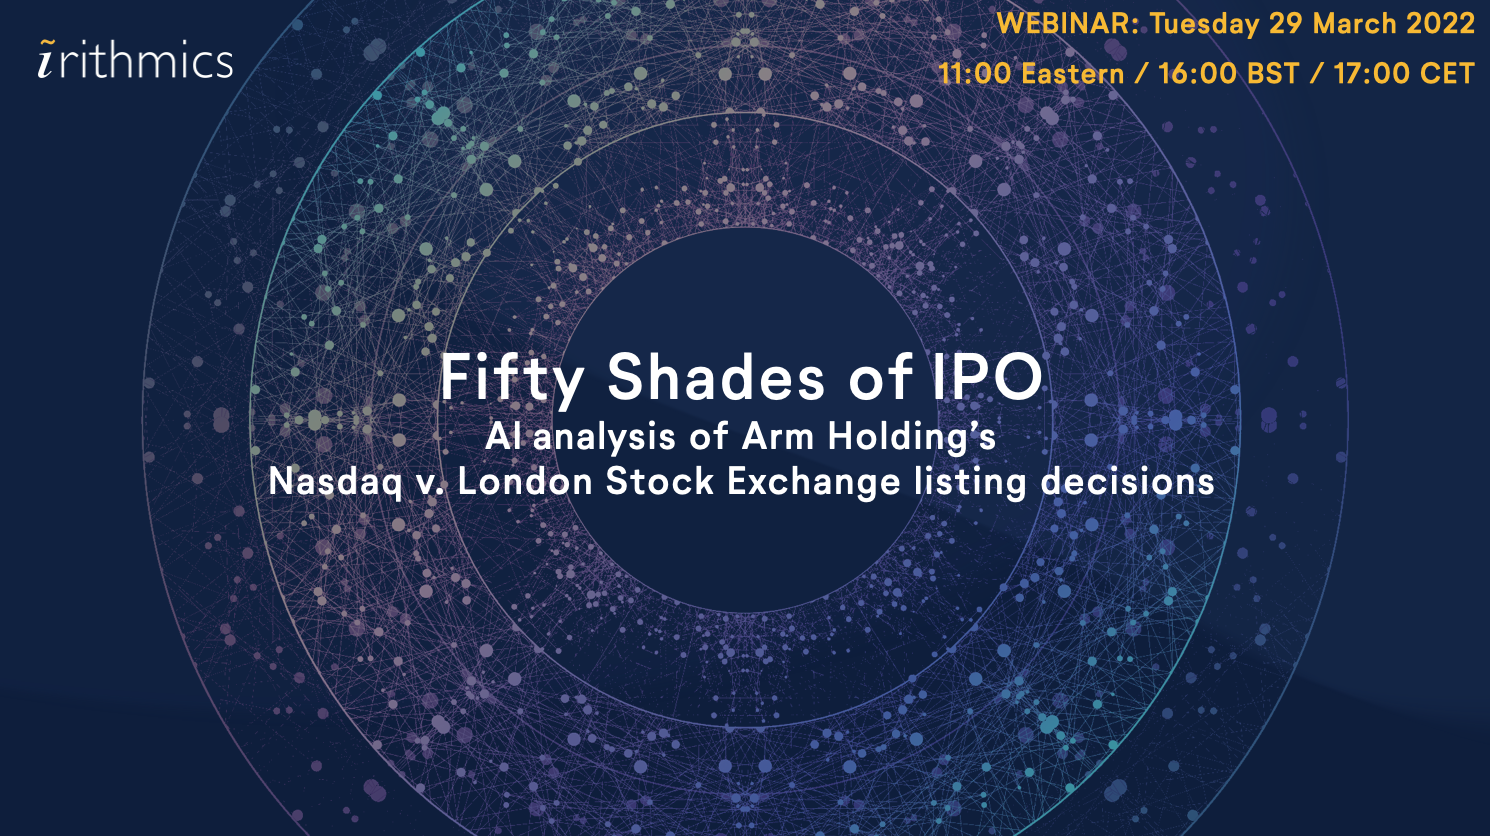 Fifty Shades of IPO webinar (Tuesday 29 March 2022)